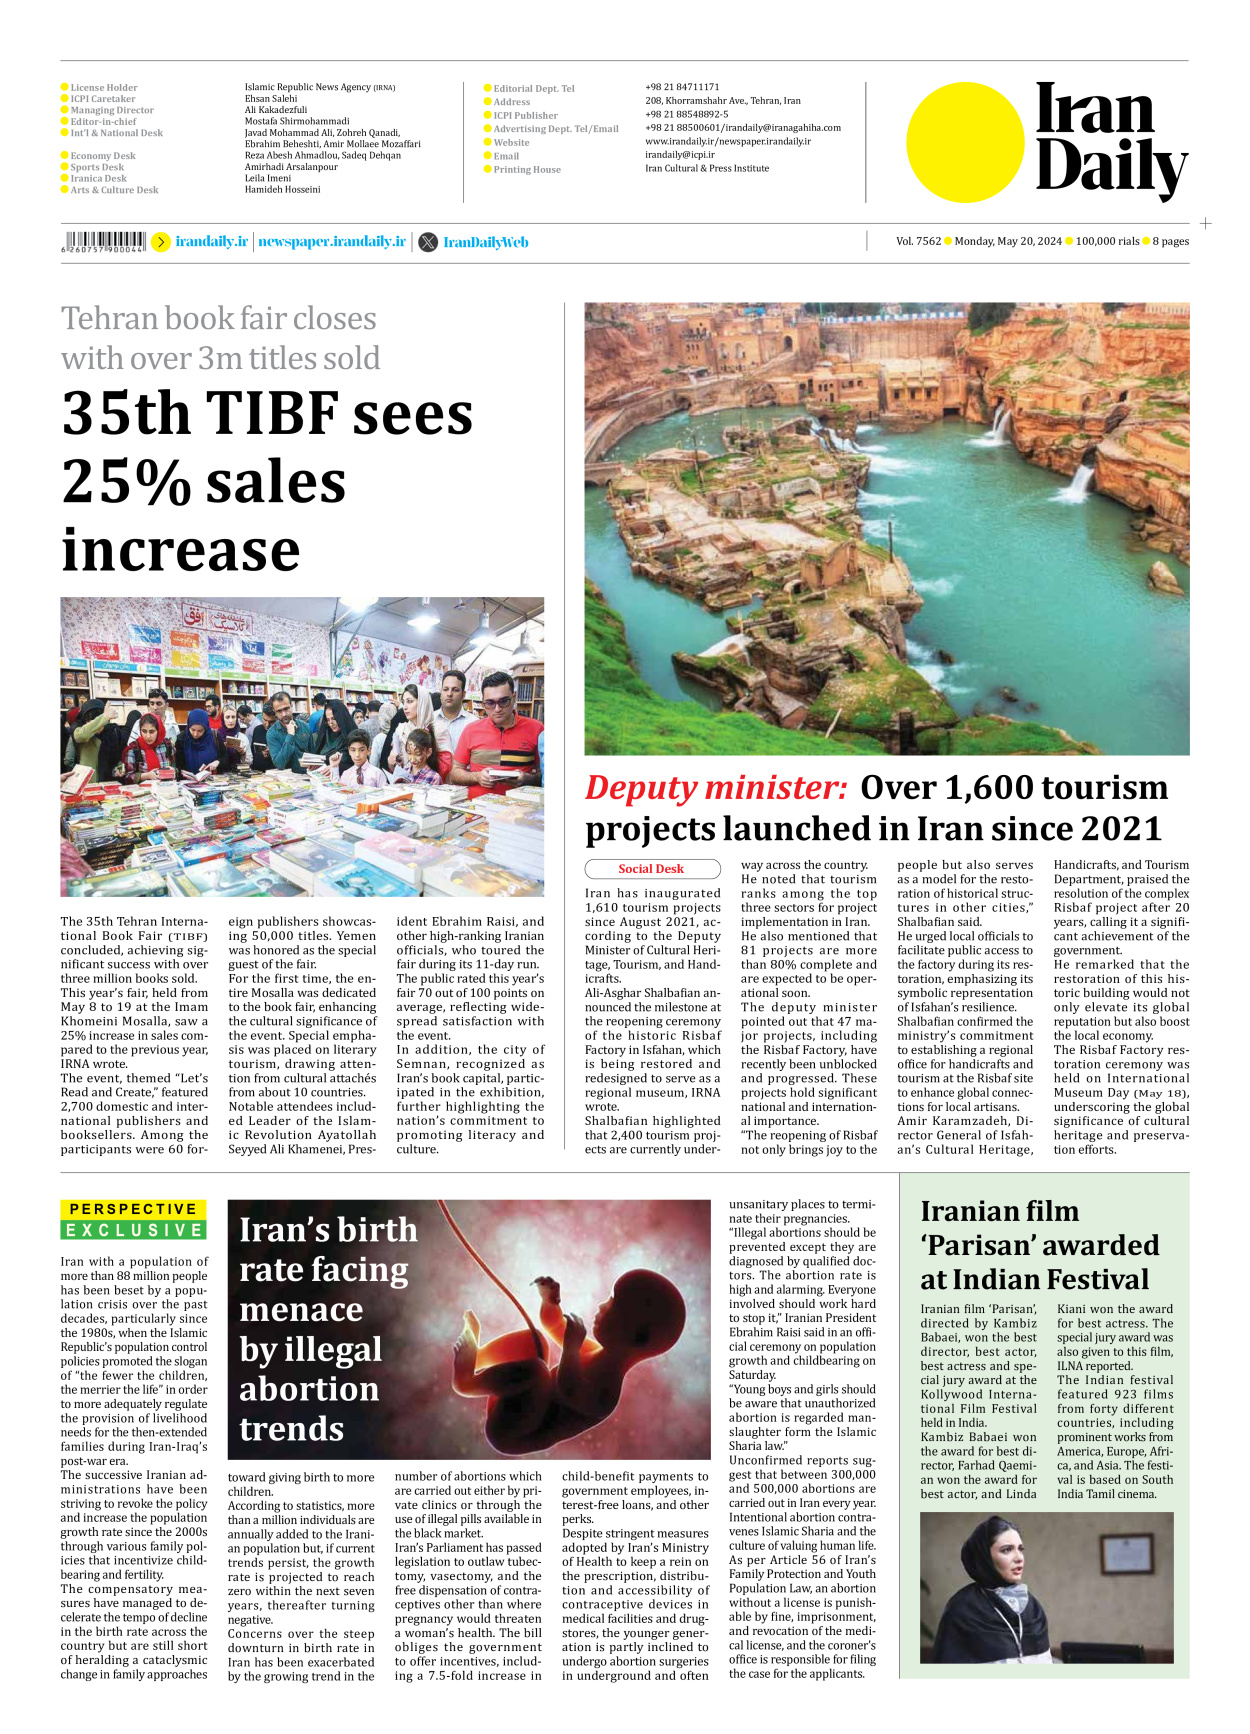 Iran Daily - Number Seven Thousand Five Hundred and Sixty Two - 19 May 2024 - Page 8